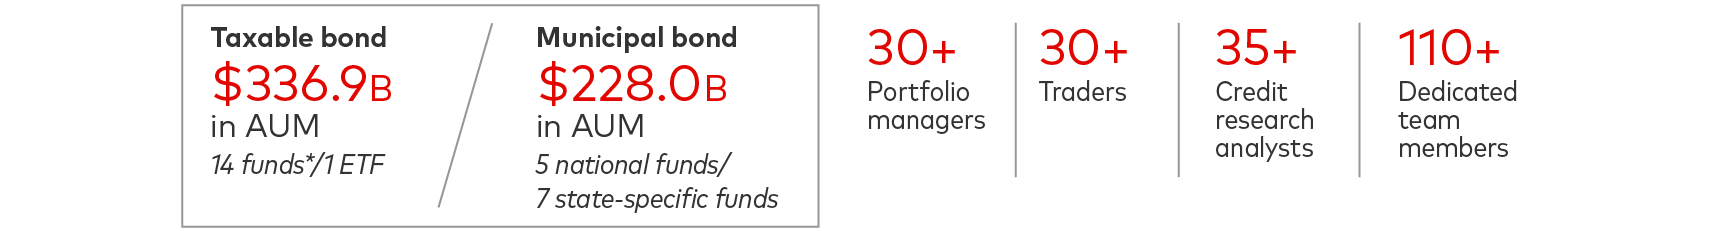 The graphic show that that Vanguard’s active Fixed Income Group manages $336.9 billion in taxable bonds and $228.0 billion in municipal bonds. The active management team includes more than 30 portfolio managers, more than 30 traders, and more than 110 dedicated team members. 